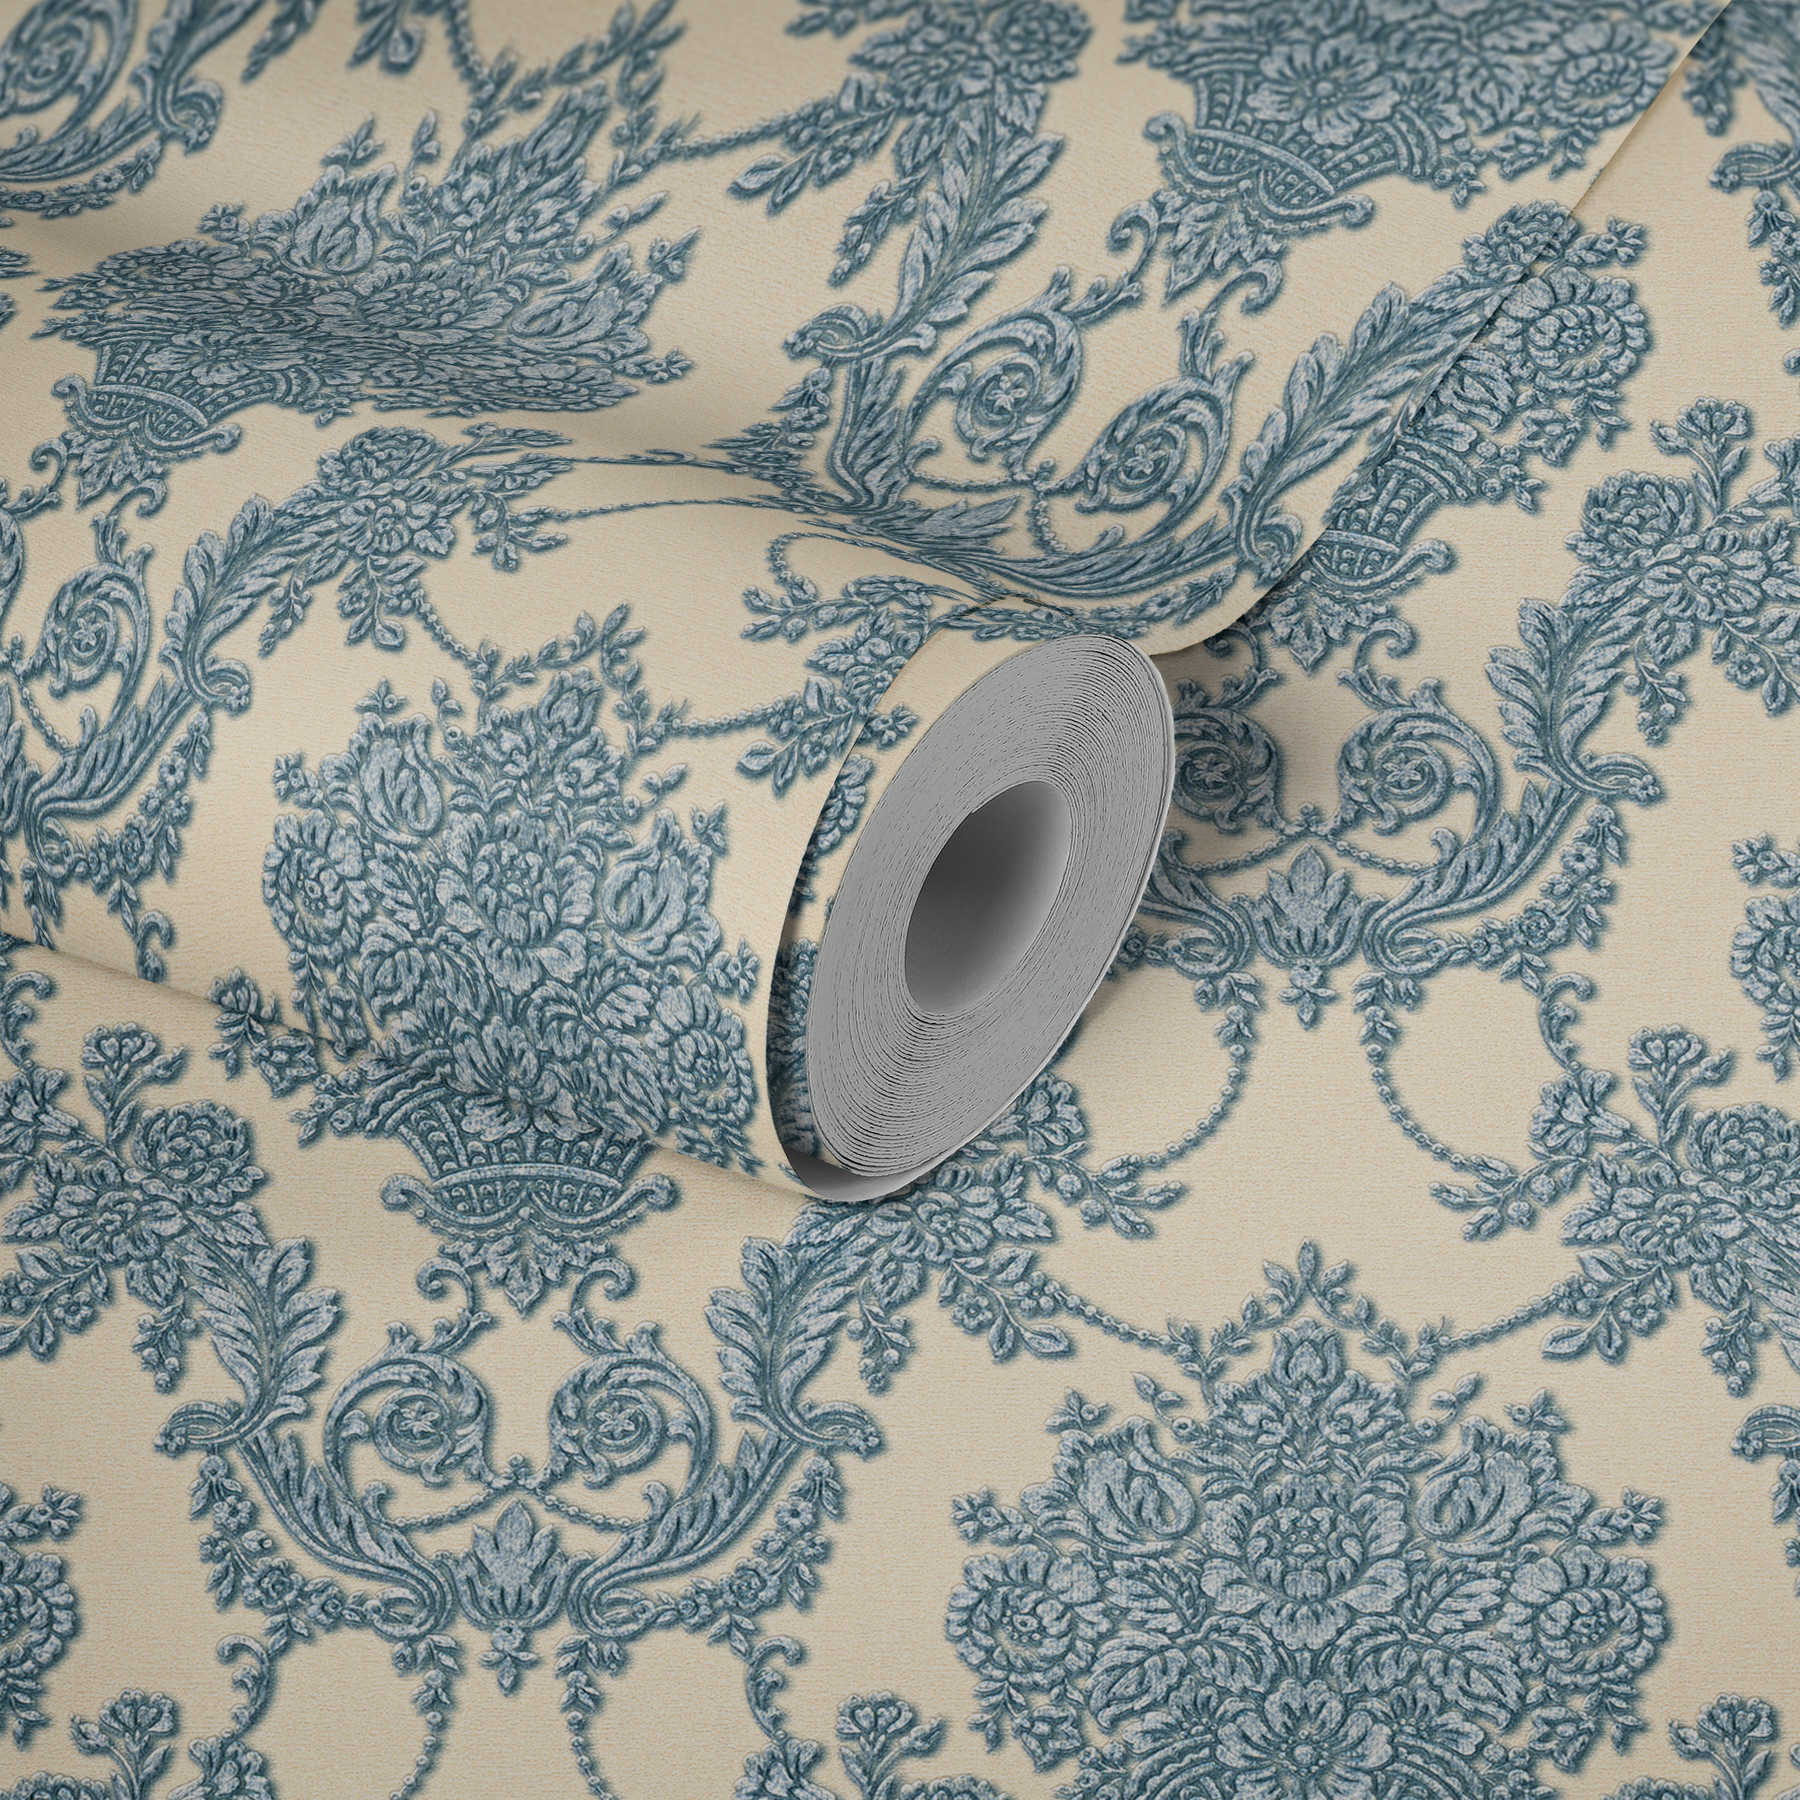             Ornamental wallpaper floral with metallic accent - beige, blue
        